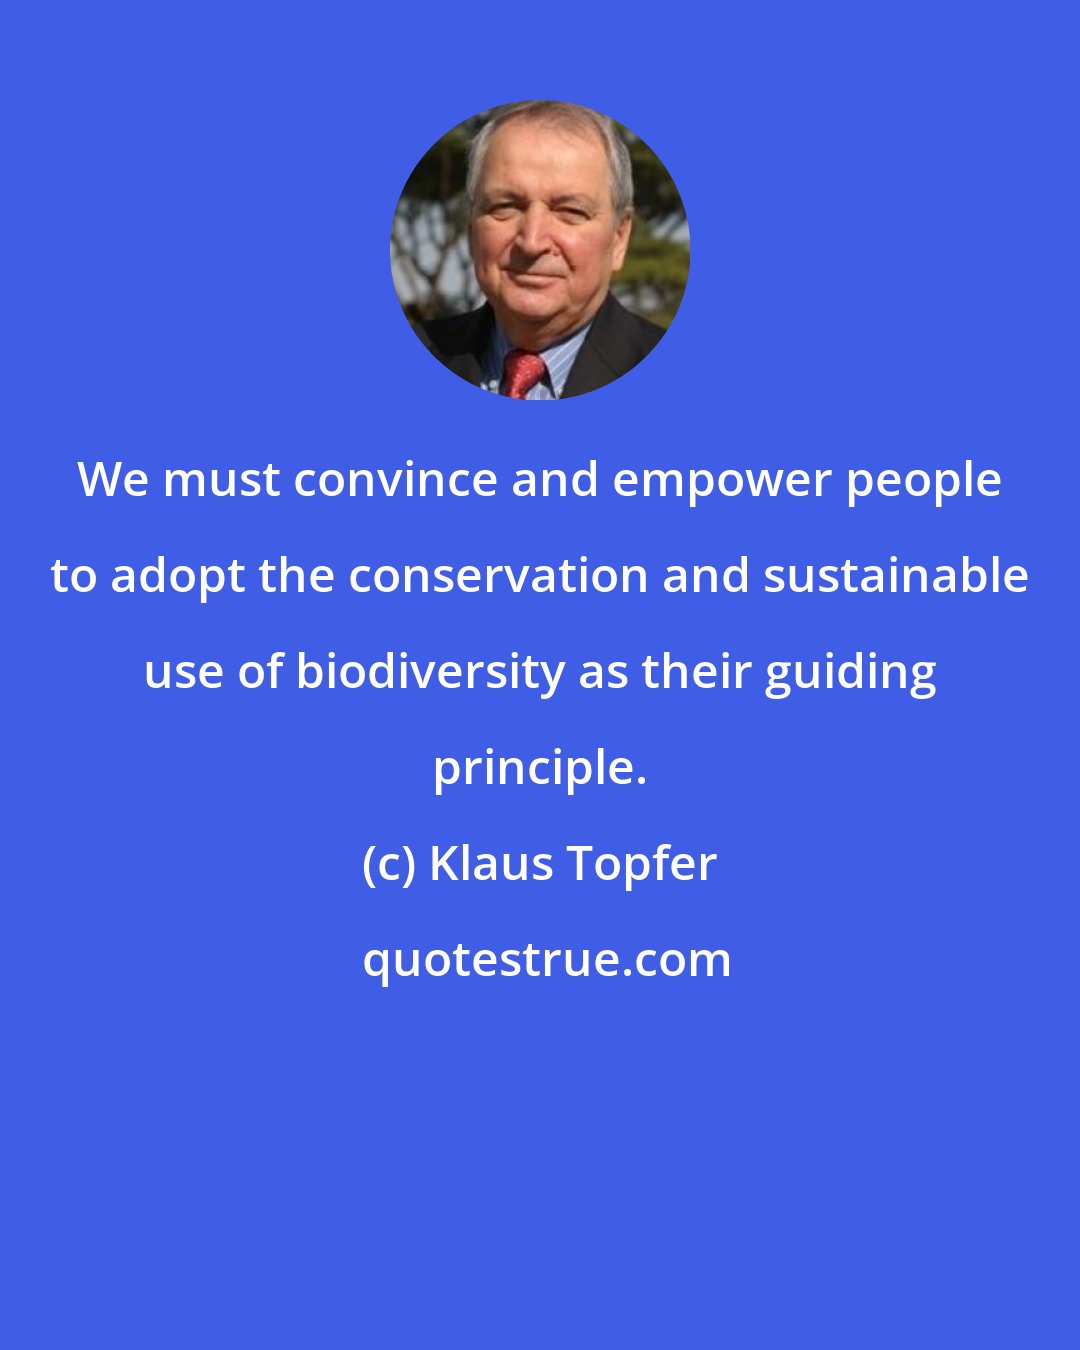 Klaus Topfer: We must convince and empower people to adopt the conservation and sustainable use of biodiversity as their guiding principle.